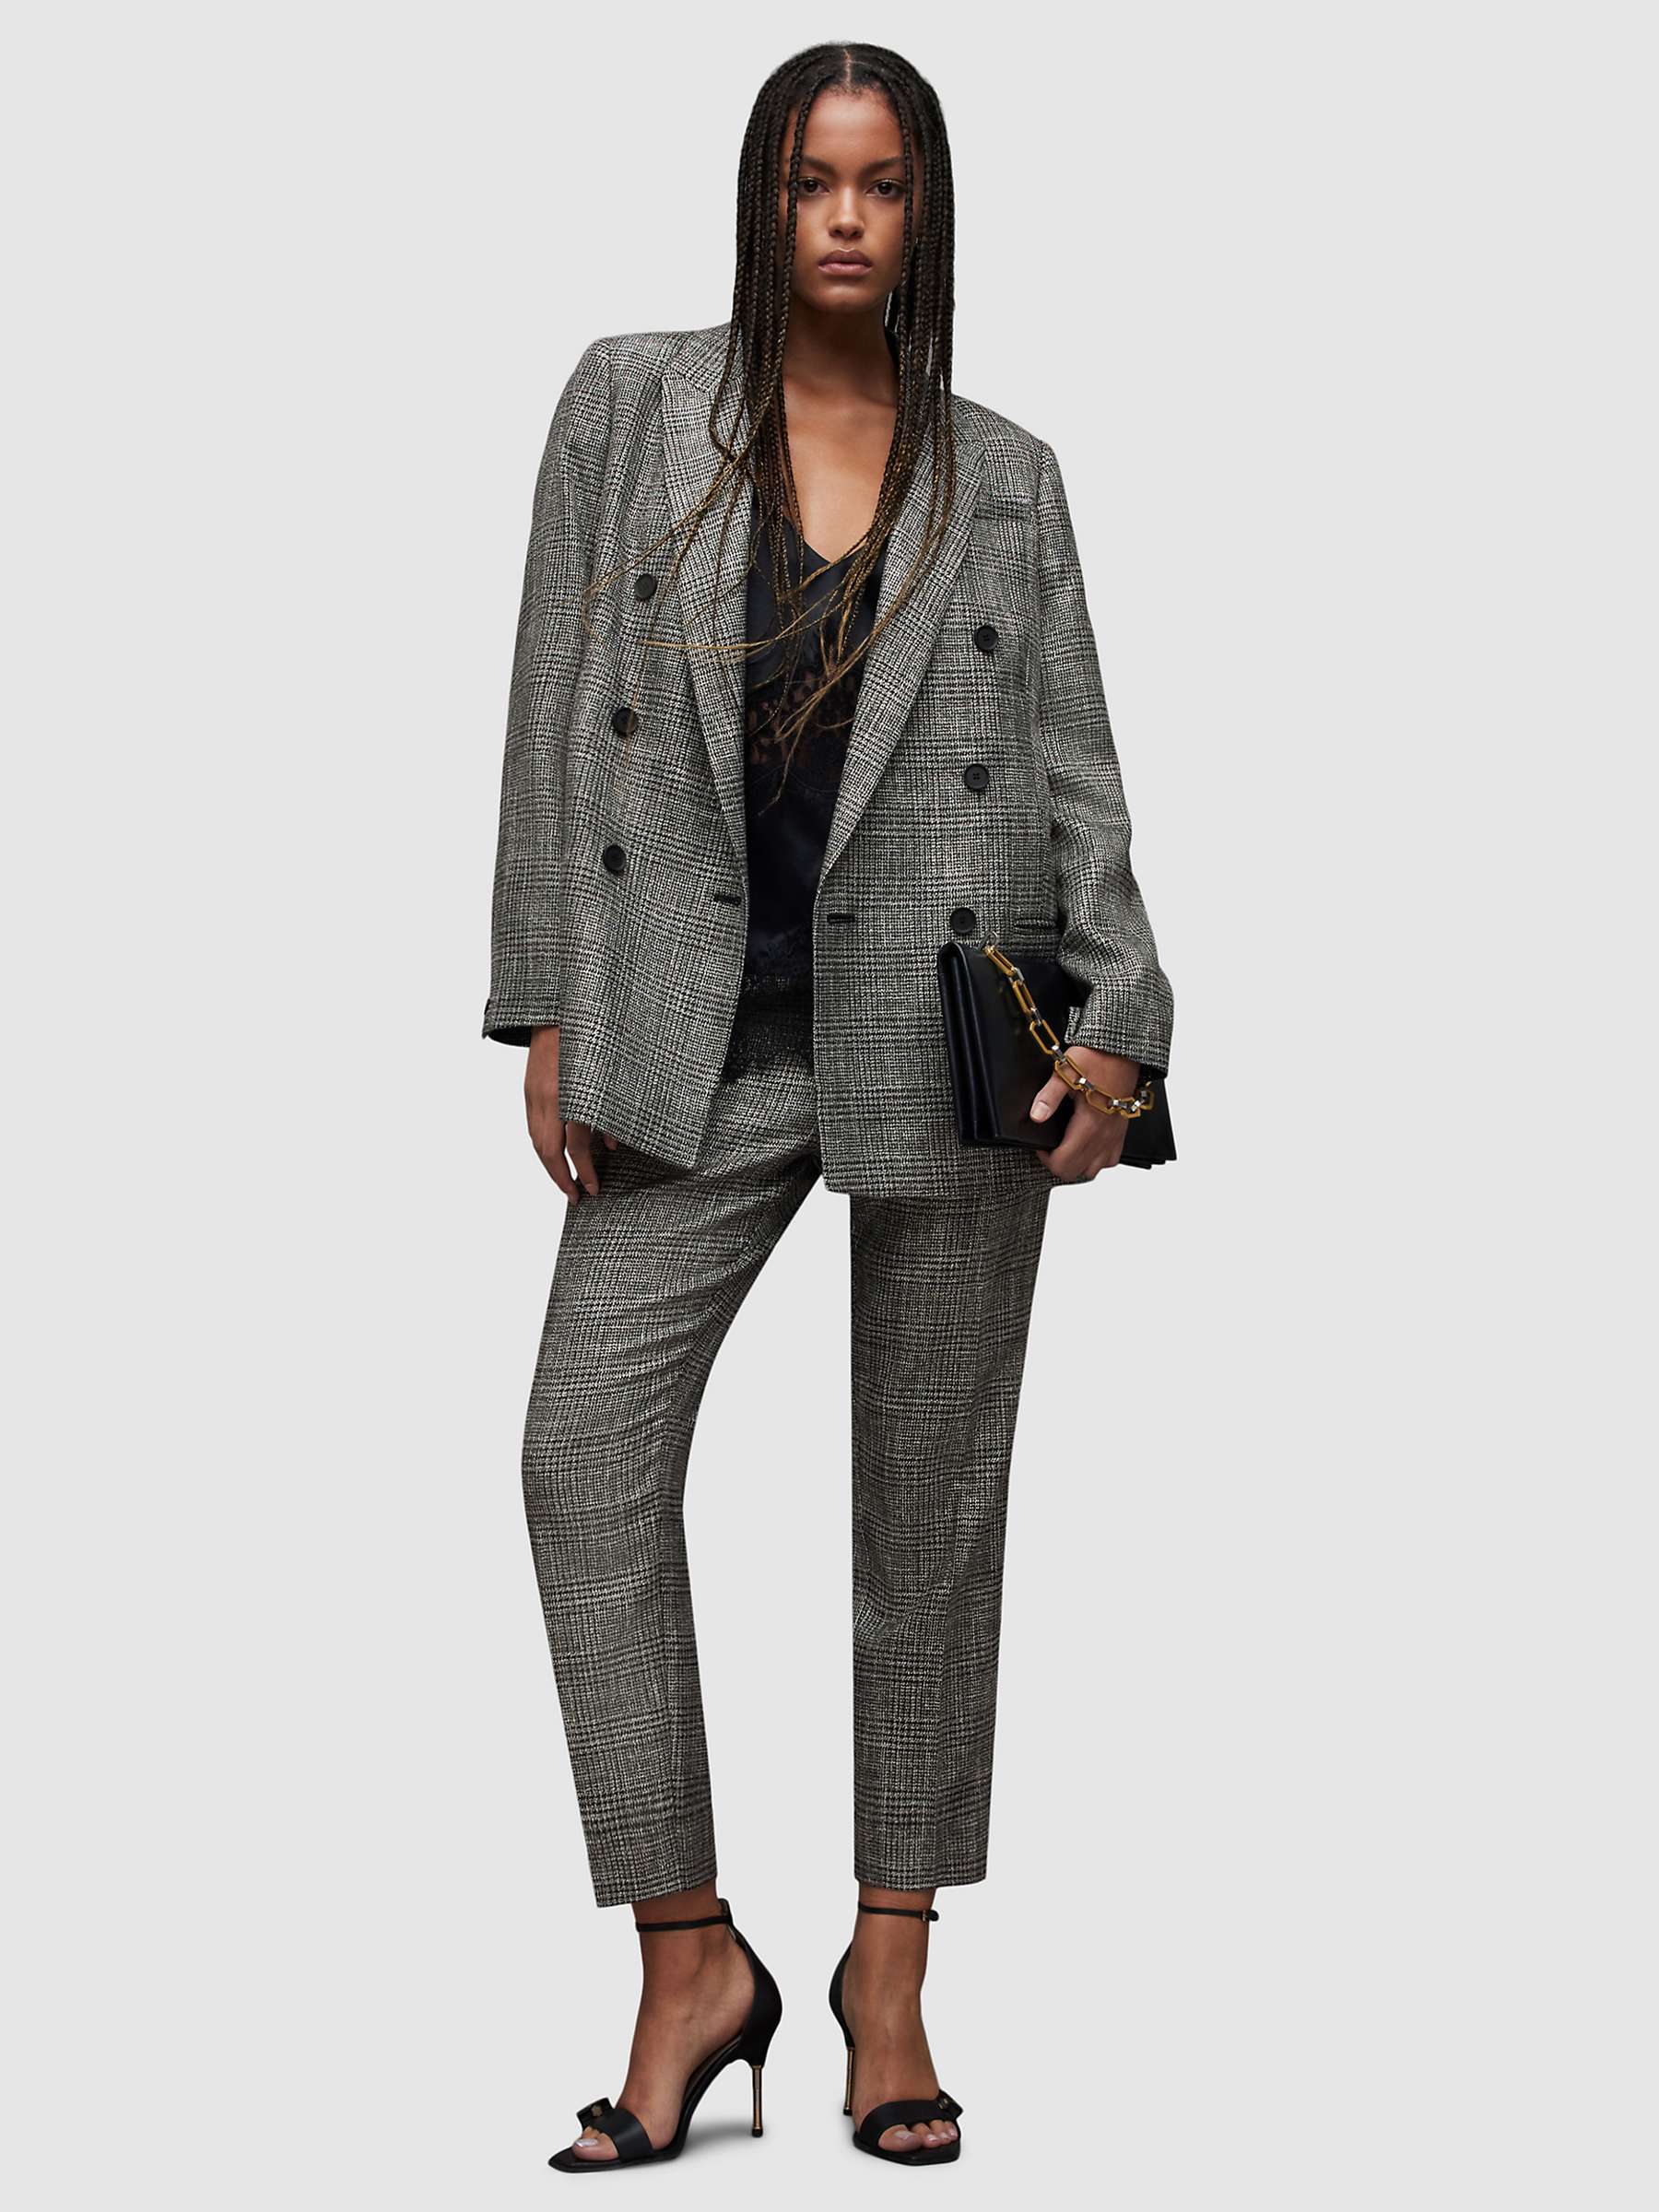 Buy AllSaints Astrid Sparkle Check Trousers, Grey Online at johnlewis.com